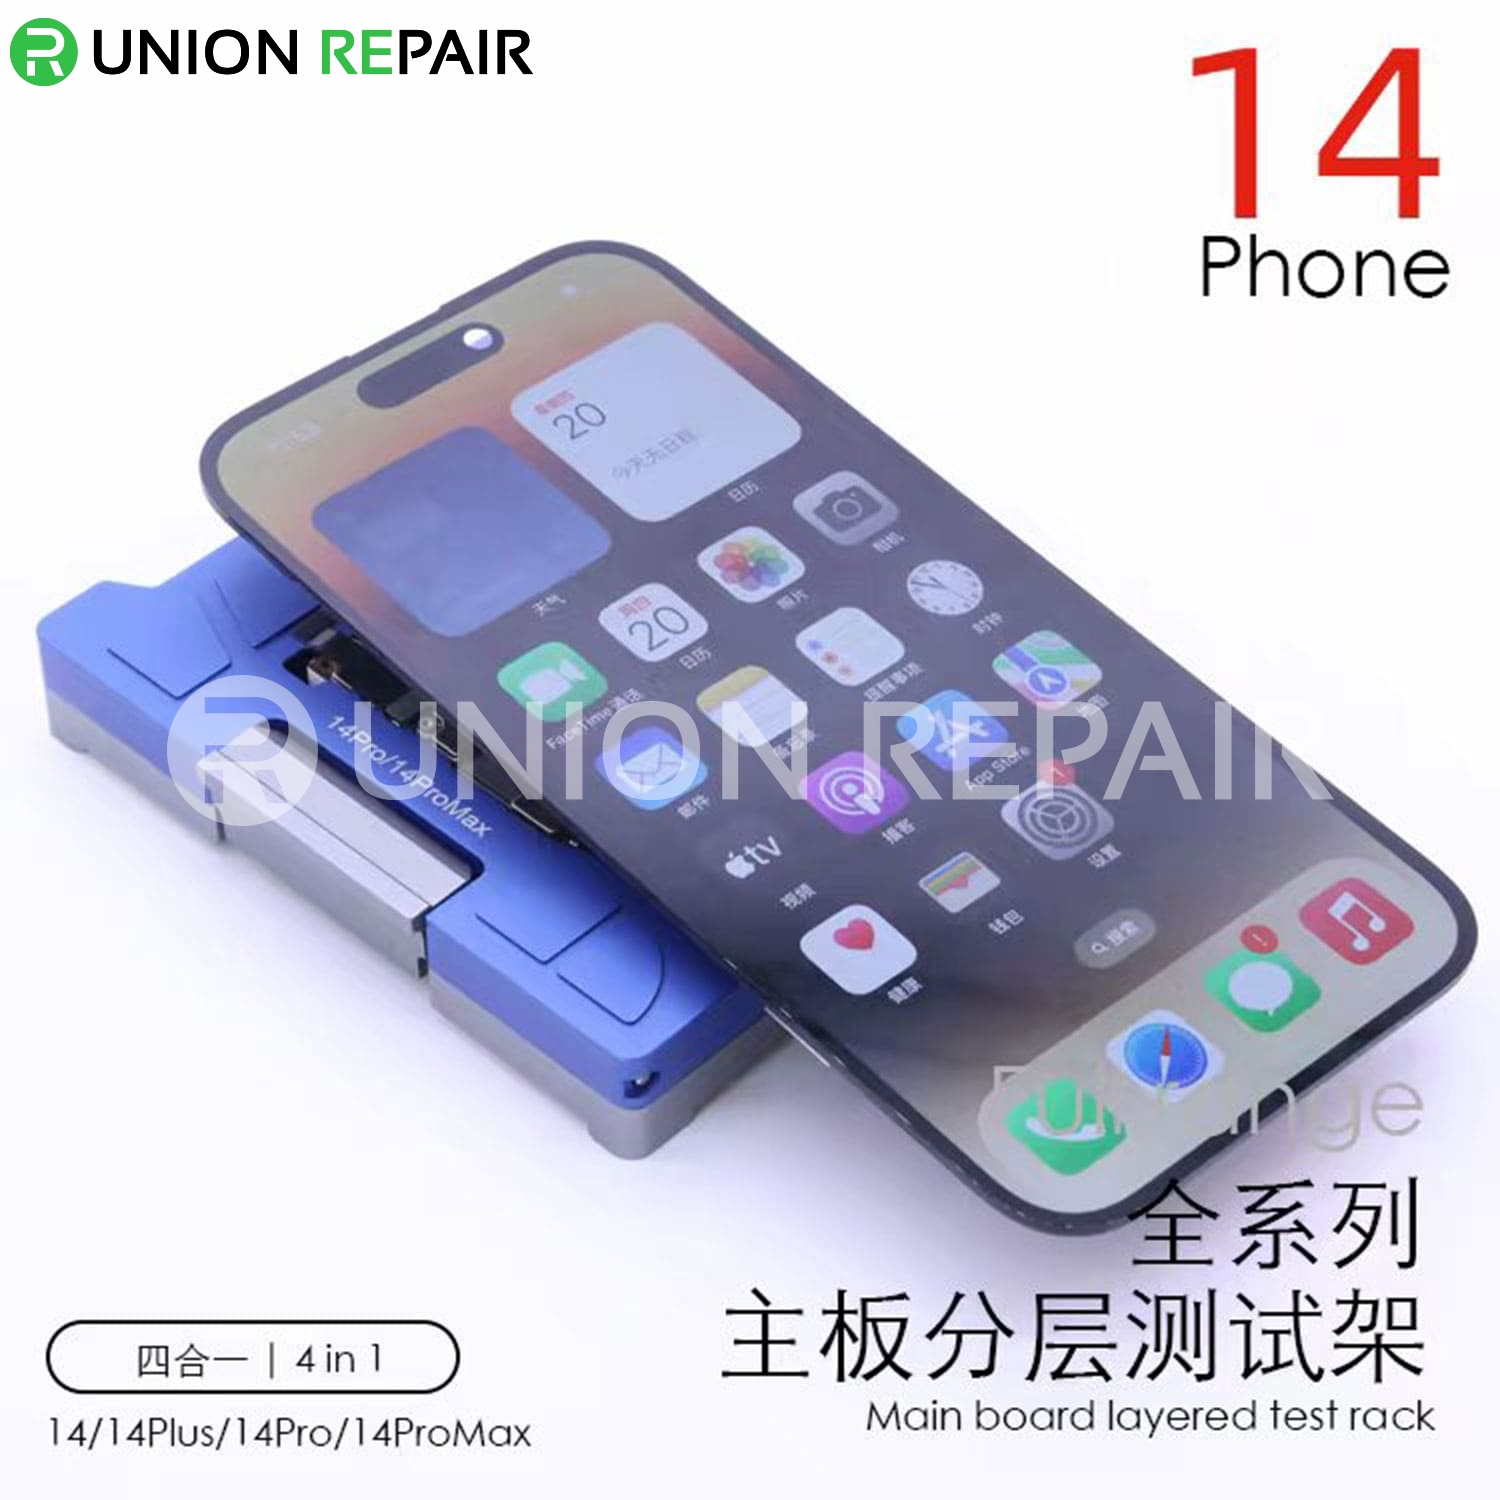 MiJing C22 for iPhone 14/14Plus/14Pro/14ProMax Main Board Function Testing Fixture